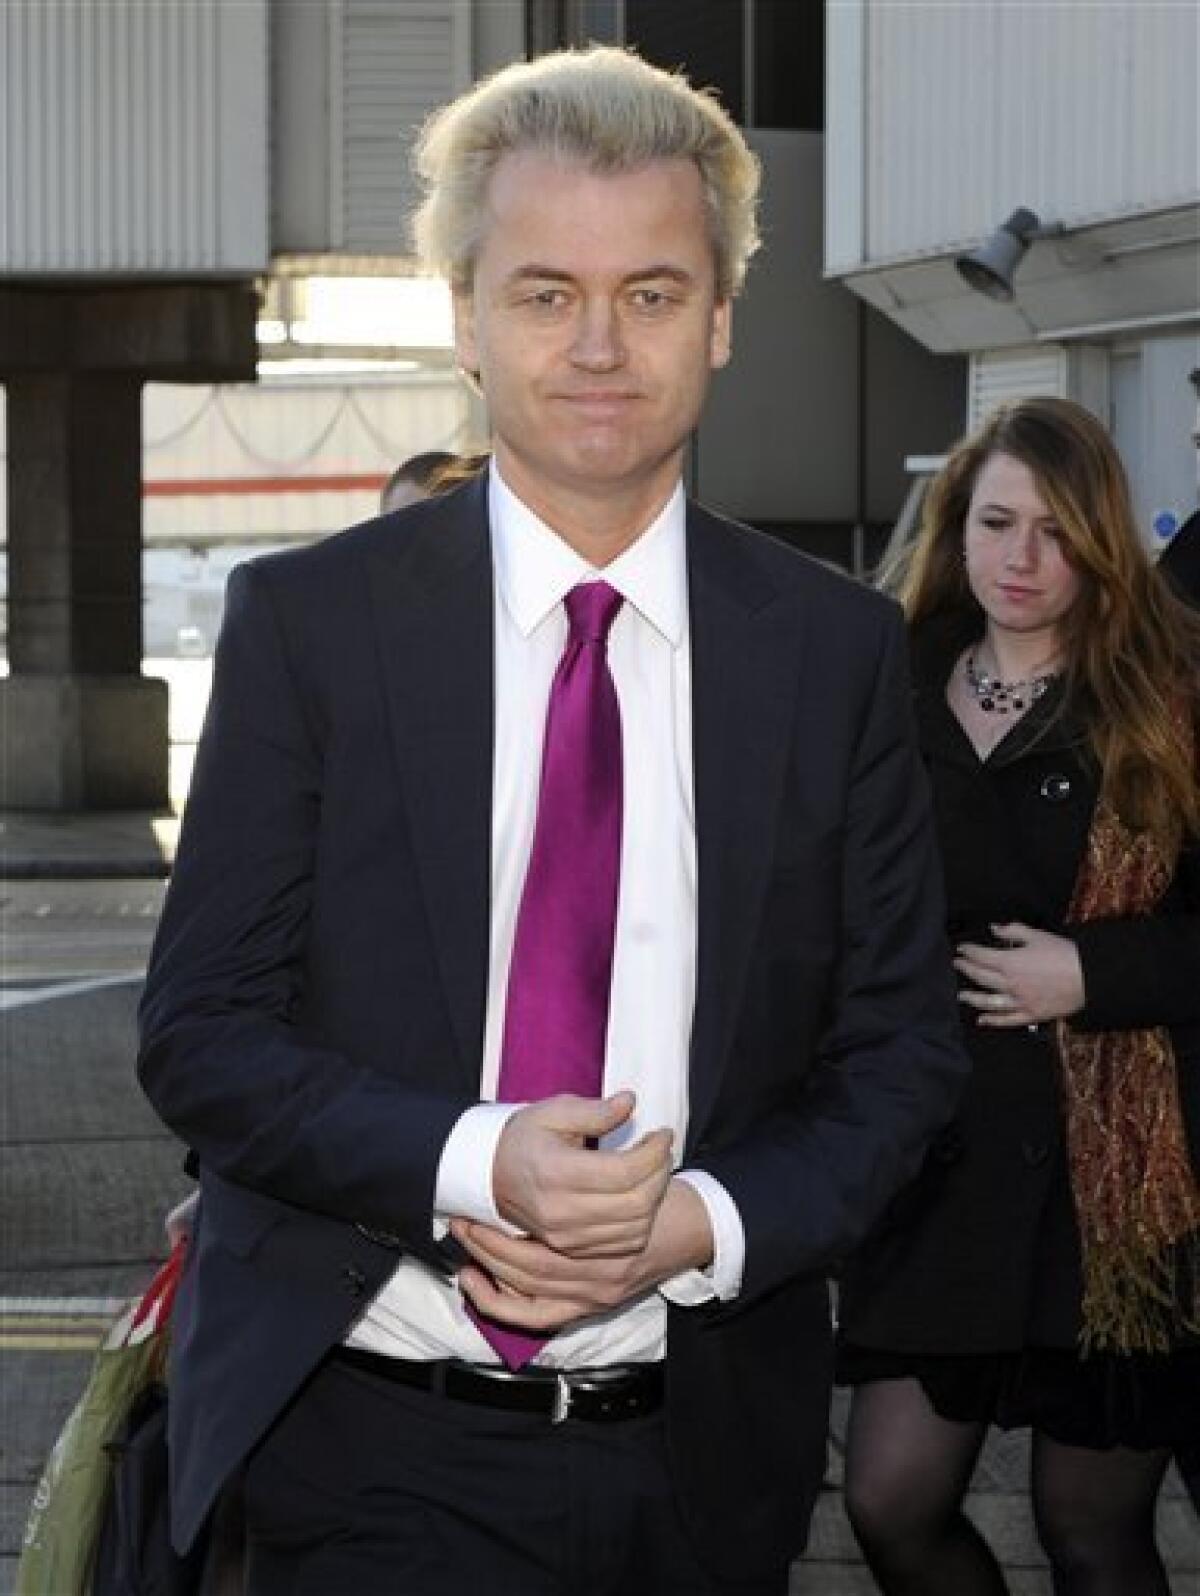 Dutch MP Geert Wilders and his entourage arrive at London's Heathrow Airport from Amsterdam, Friday March 5, 2010. (AP Photo)